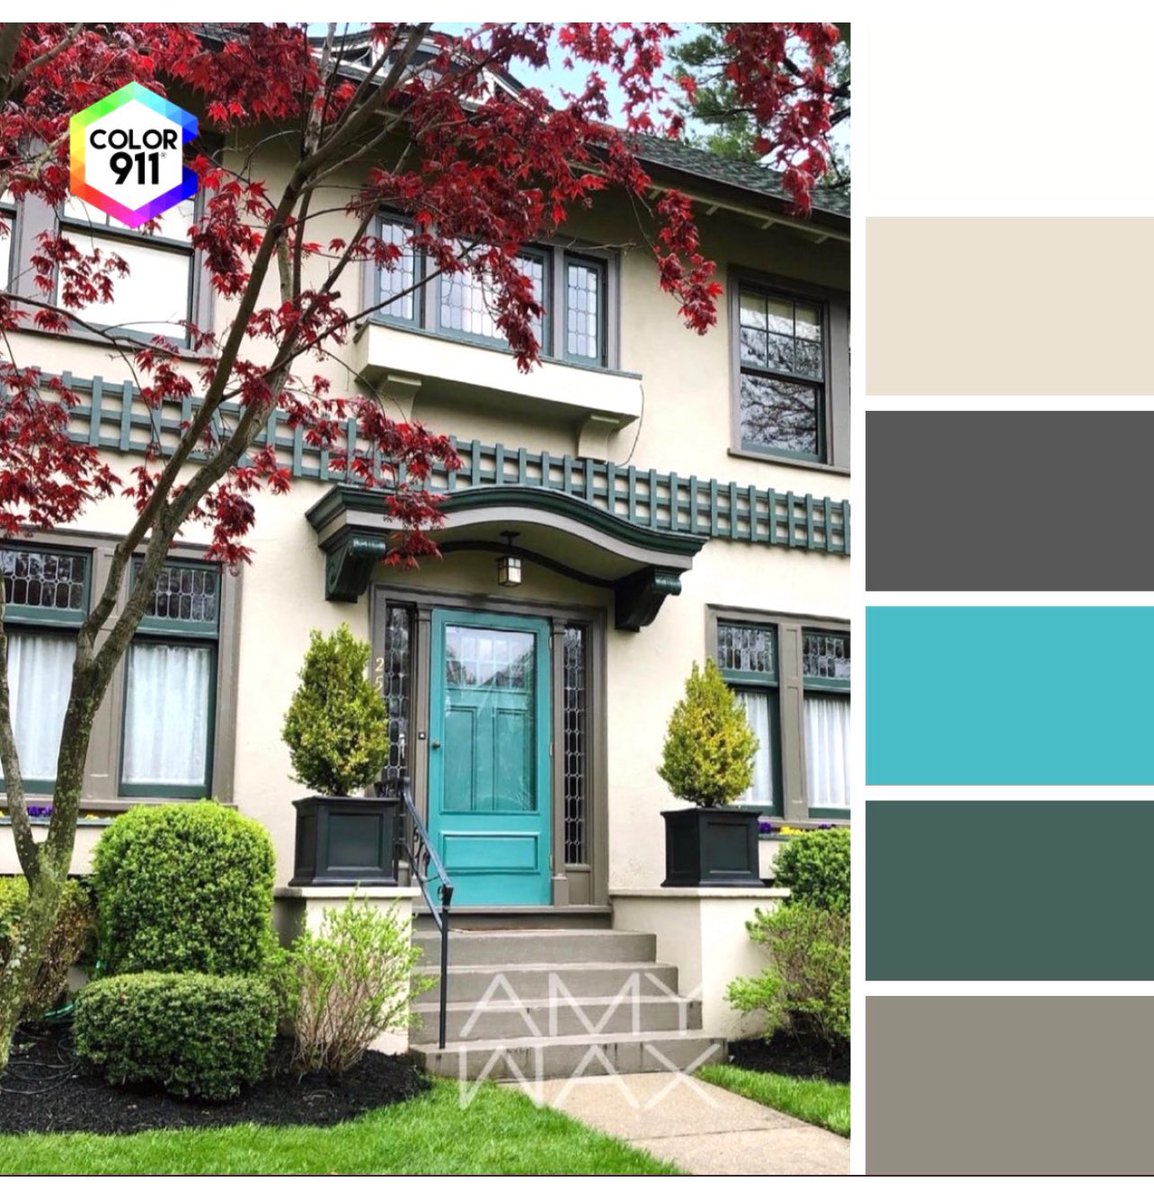 Looking to spruce up your home? Capture and save #colors that inspire you w the #color #swatches in the #Color911 #app! Save colors that inspire you on the spot! Color911.com #exterior #homedesign #frontdoor #accent #WednesdayMotivation @goodhousemag @HouseBeautiful